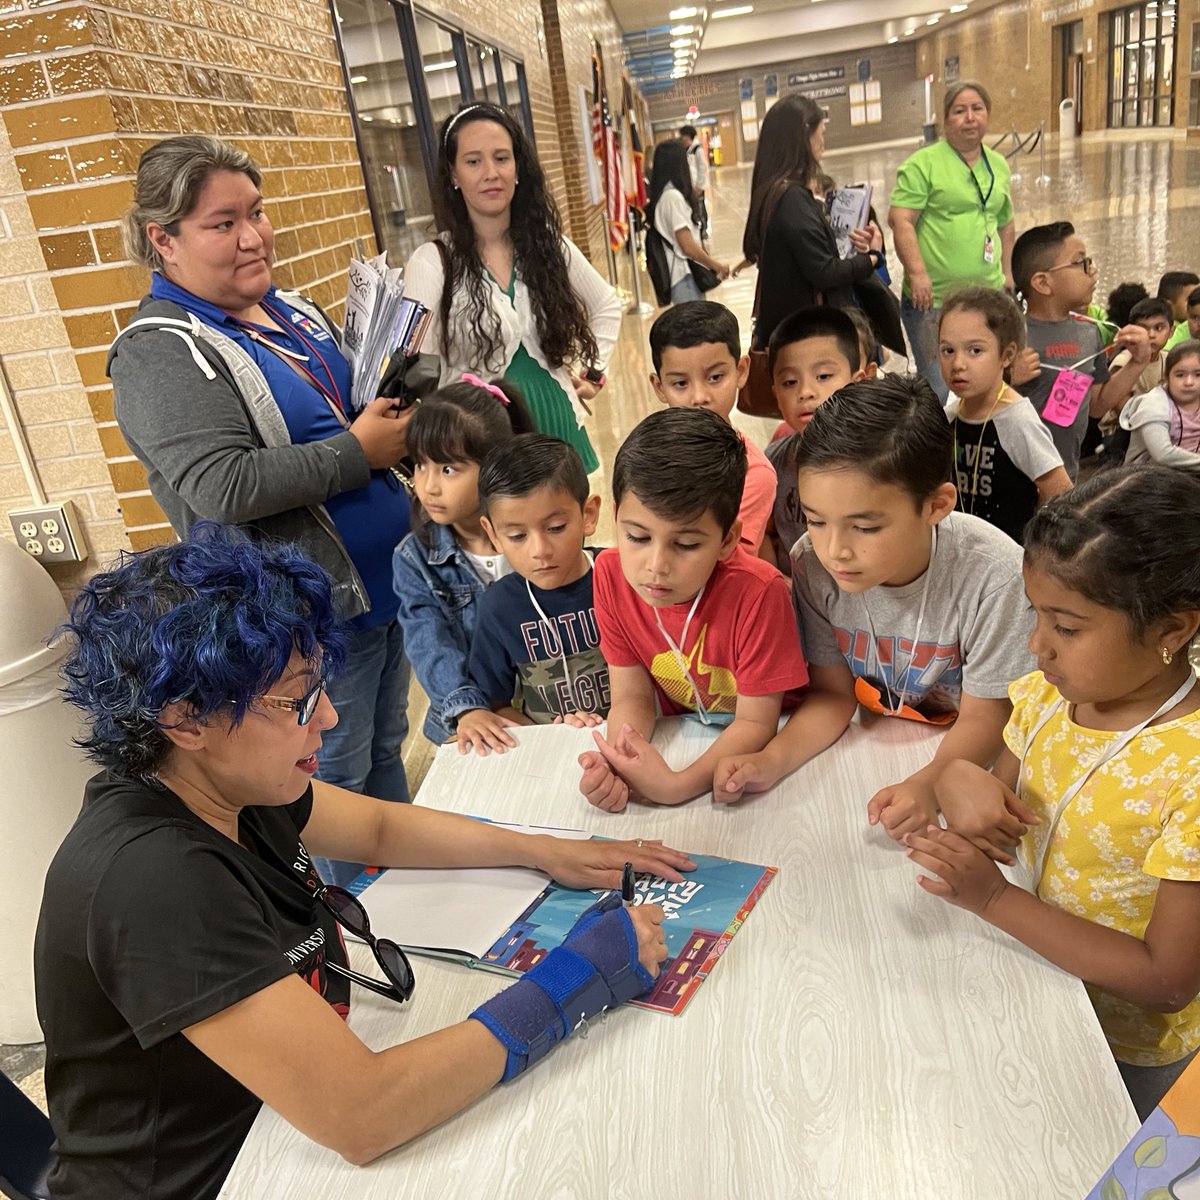 A sweet moment with our youngest readers and @NoNieqaRamos how amazing to add such great stories to their home libraries  #ThePlotThickens #AldineConectado @AldineAEA #AldineConnected @delgadong94